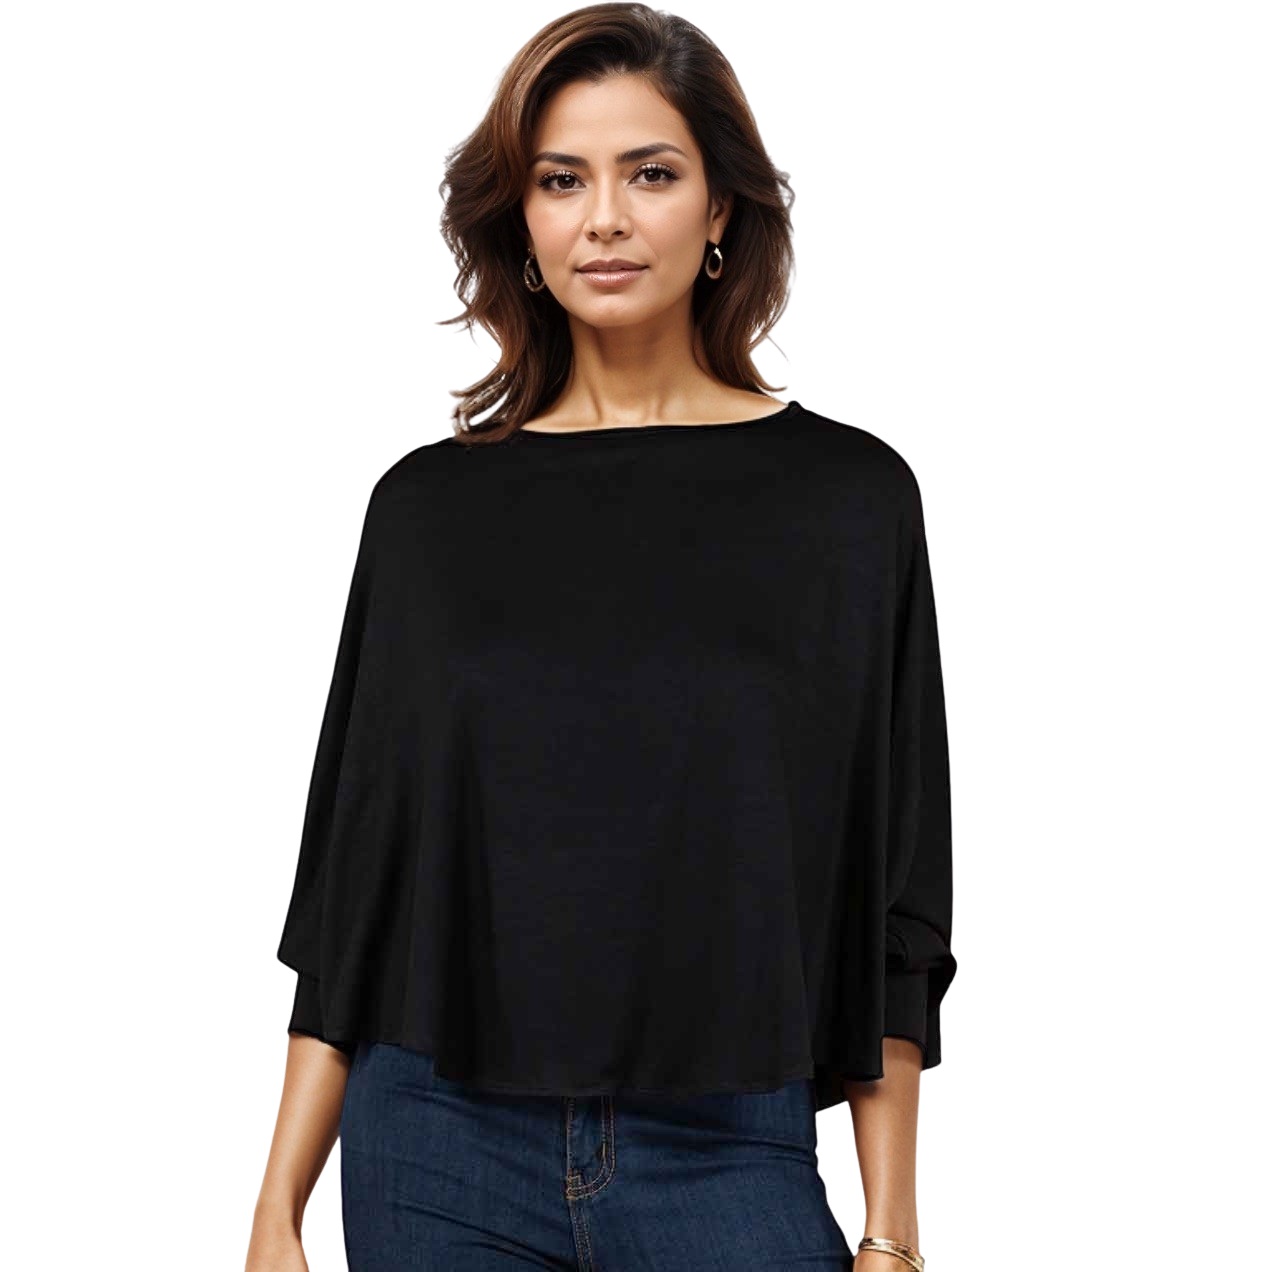 1818 - Black<br>
Poncho with Sleeves